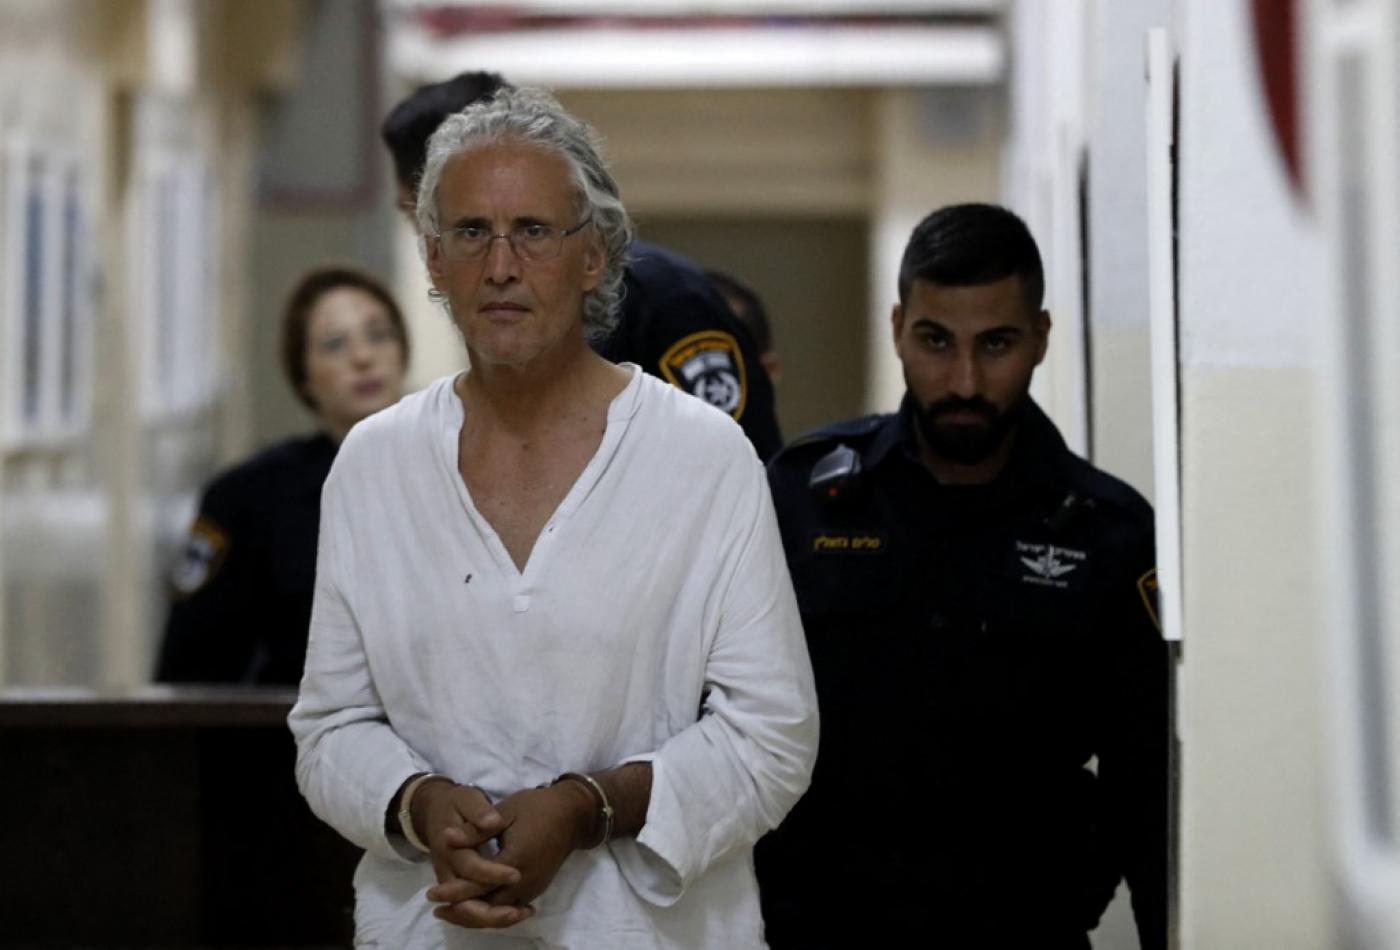 Frank Romano, who was arrested by Israel while protesting against the demolition of a Palestinian village in the West Bank, appears at the Jerusalem court on 16 September 2018 (AFP)